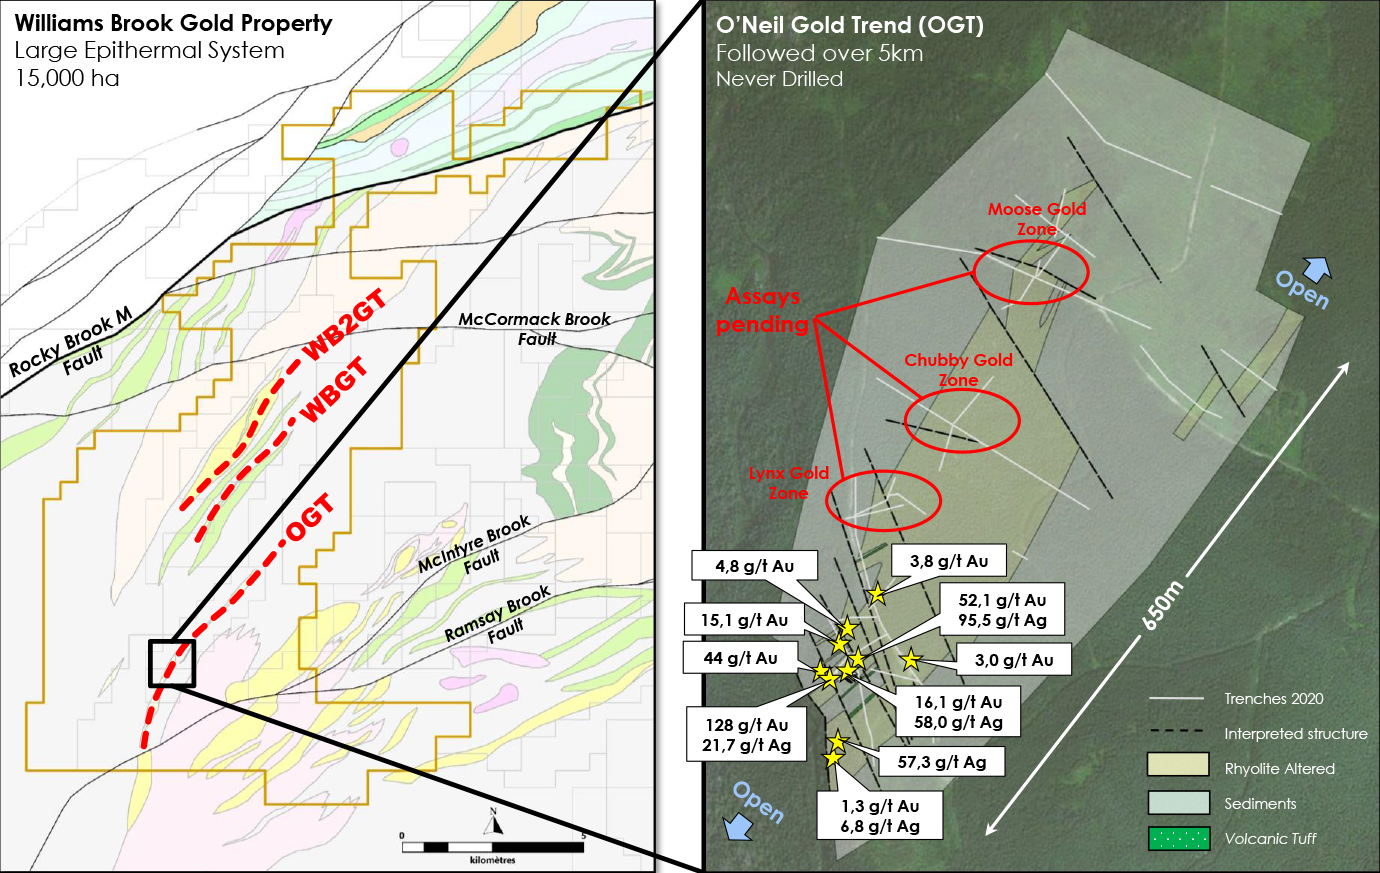 Figure 2: The Williams Brook Property O'Neil Gold Trend (OGT)